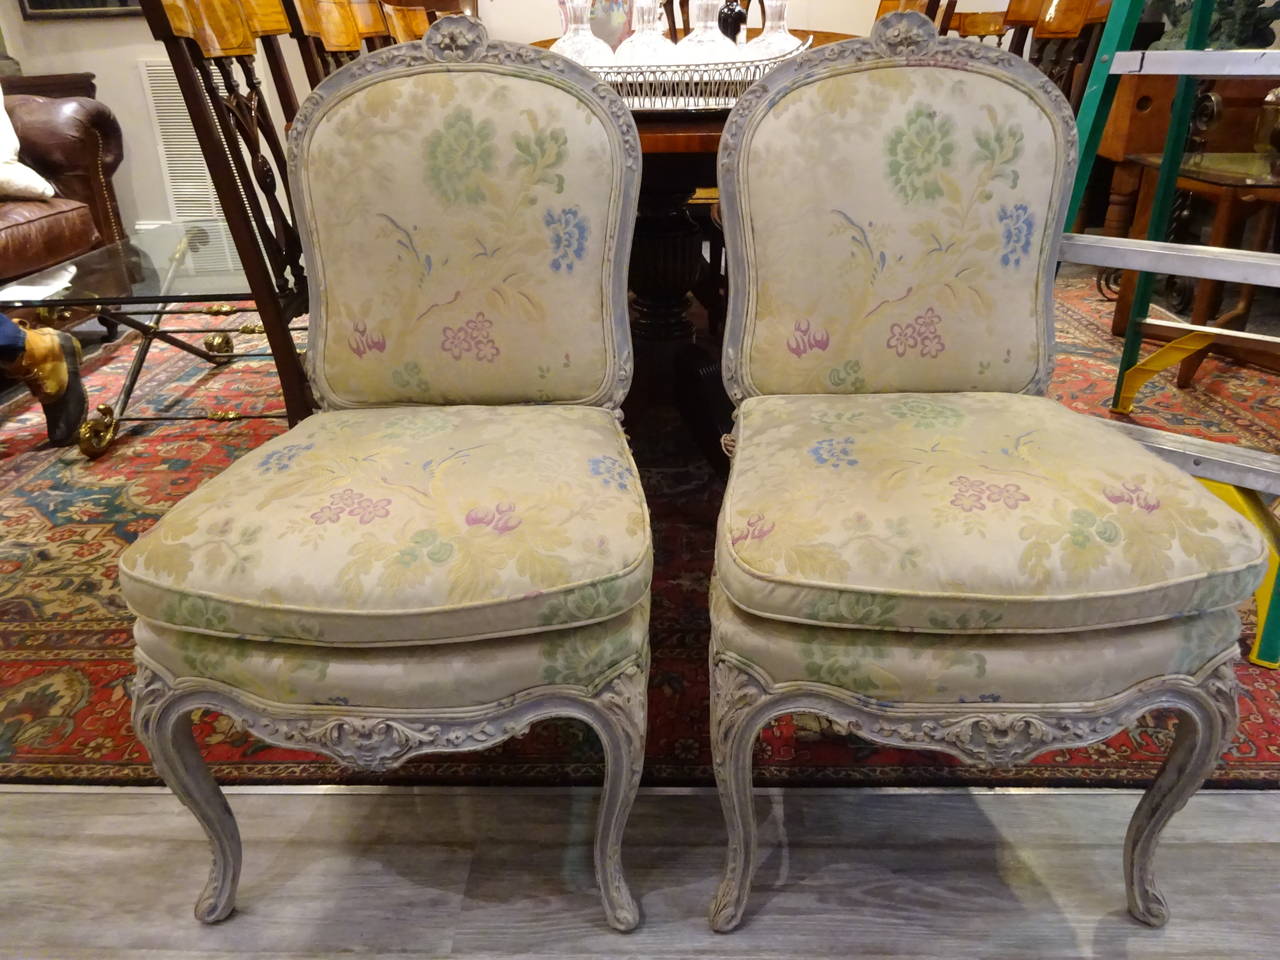 Pair of Louis XVI Style Slipper Chairs, with original vintage scalamandre upholstery, subtle polychromed decorated frames, substanial size for a slipper chair. Ready for new upholstery.